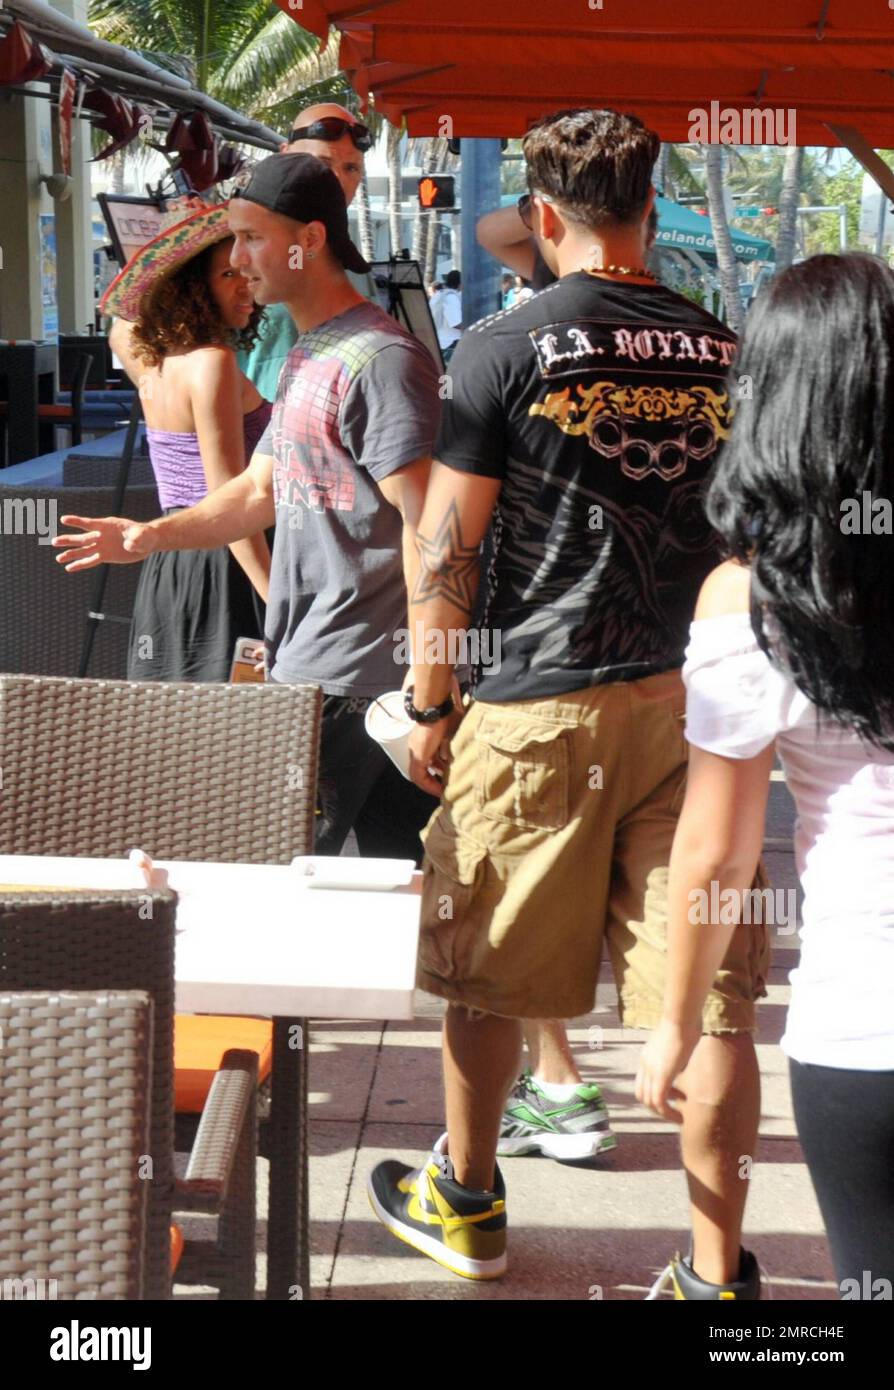 Mike 'The Situation' Sorrentino, DJ Pauly D and Angelina 'Jolie' celebrate Cinco de Mayo at a local restaurant while they film an episode of thier hit reality series, MTV's 'Jersey Shore,' in Miami Beach, FL. 5/5/10.   . Stock Photo